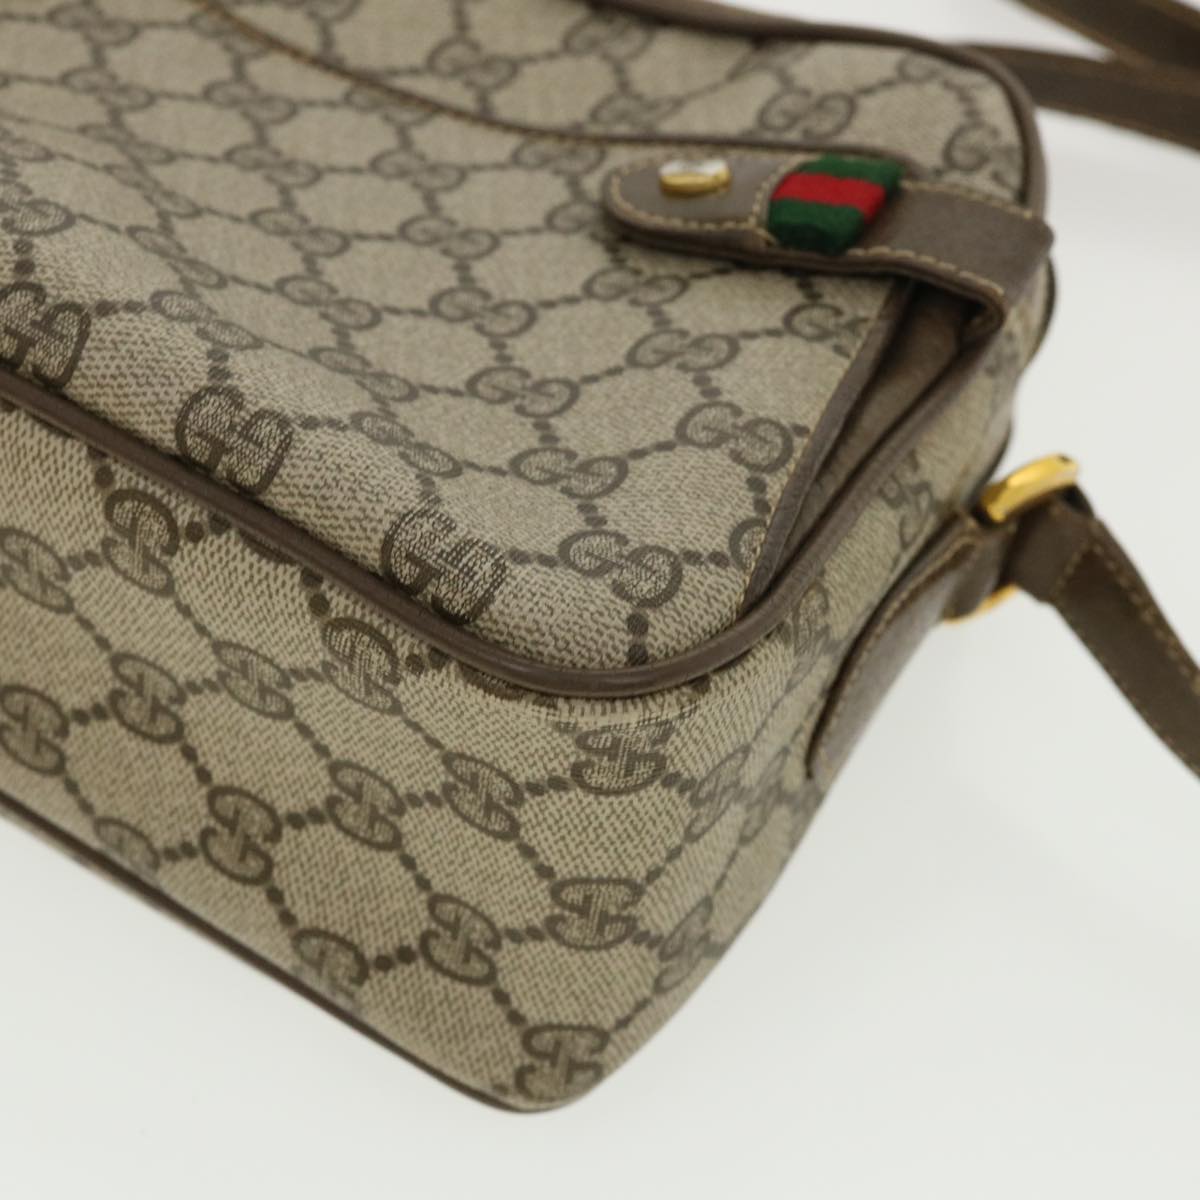 GUCCI GG Canvas Web Sherry Line Shoulder Bag Beige Red Green Auth yk5378